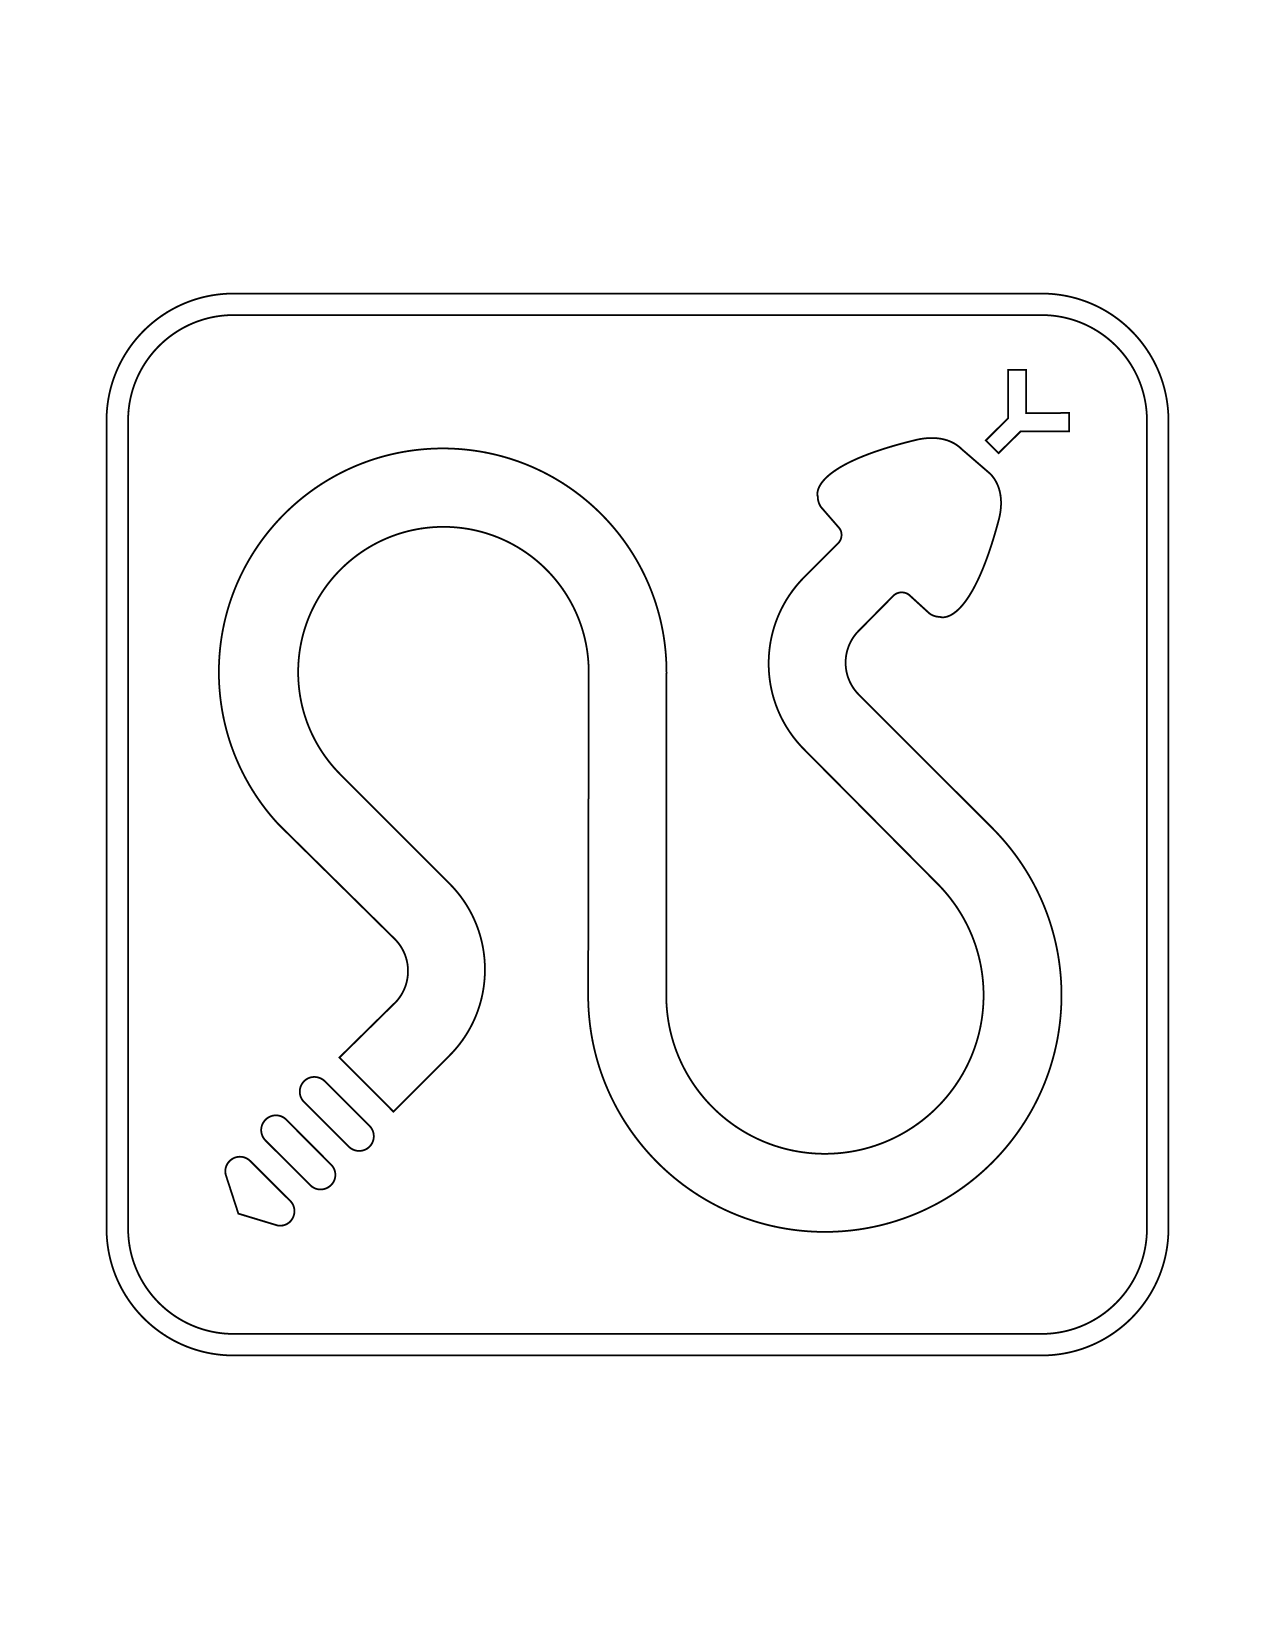 Snake Crossing Symbol Sign Coloring Page